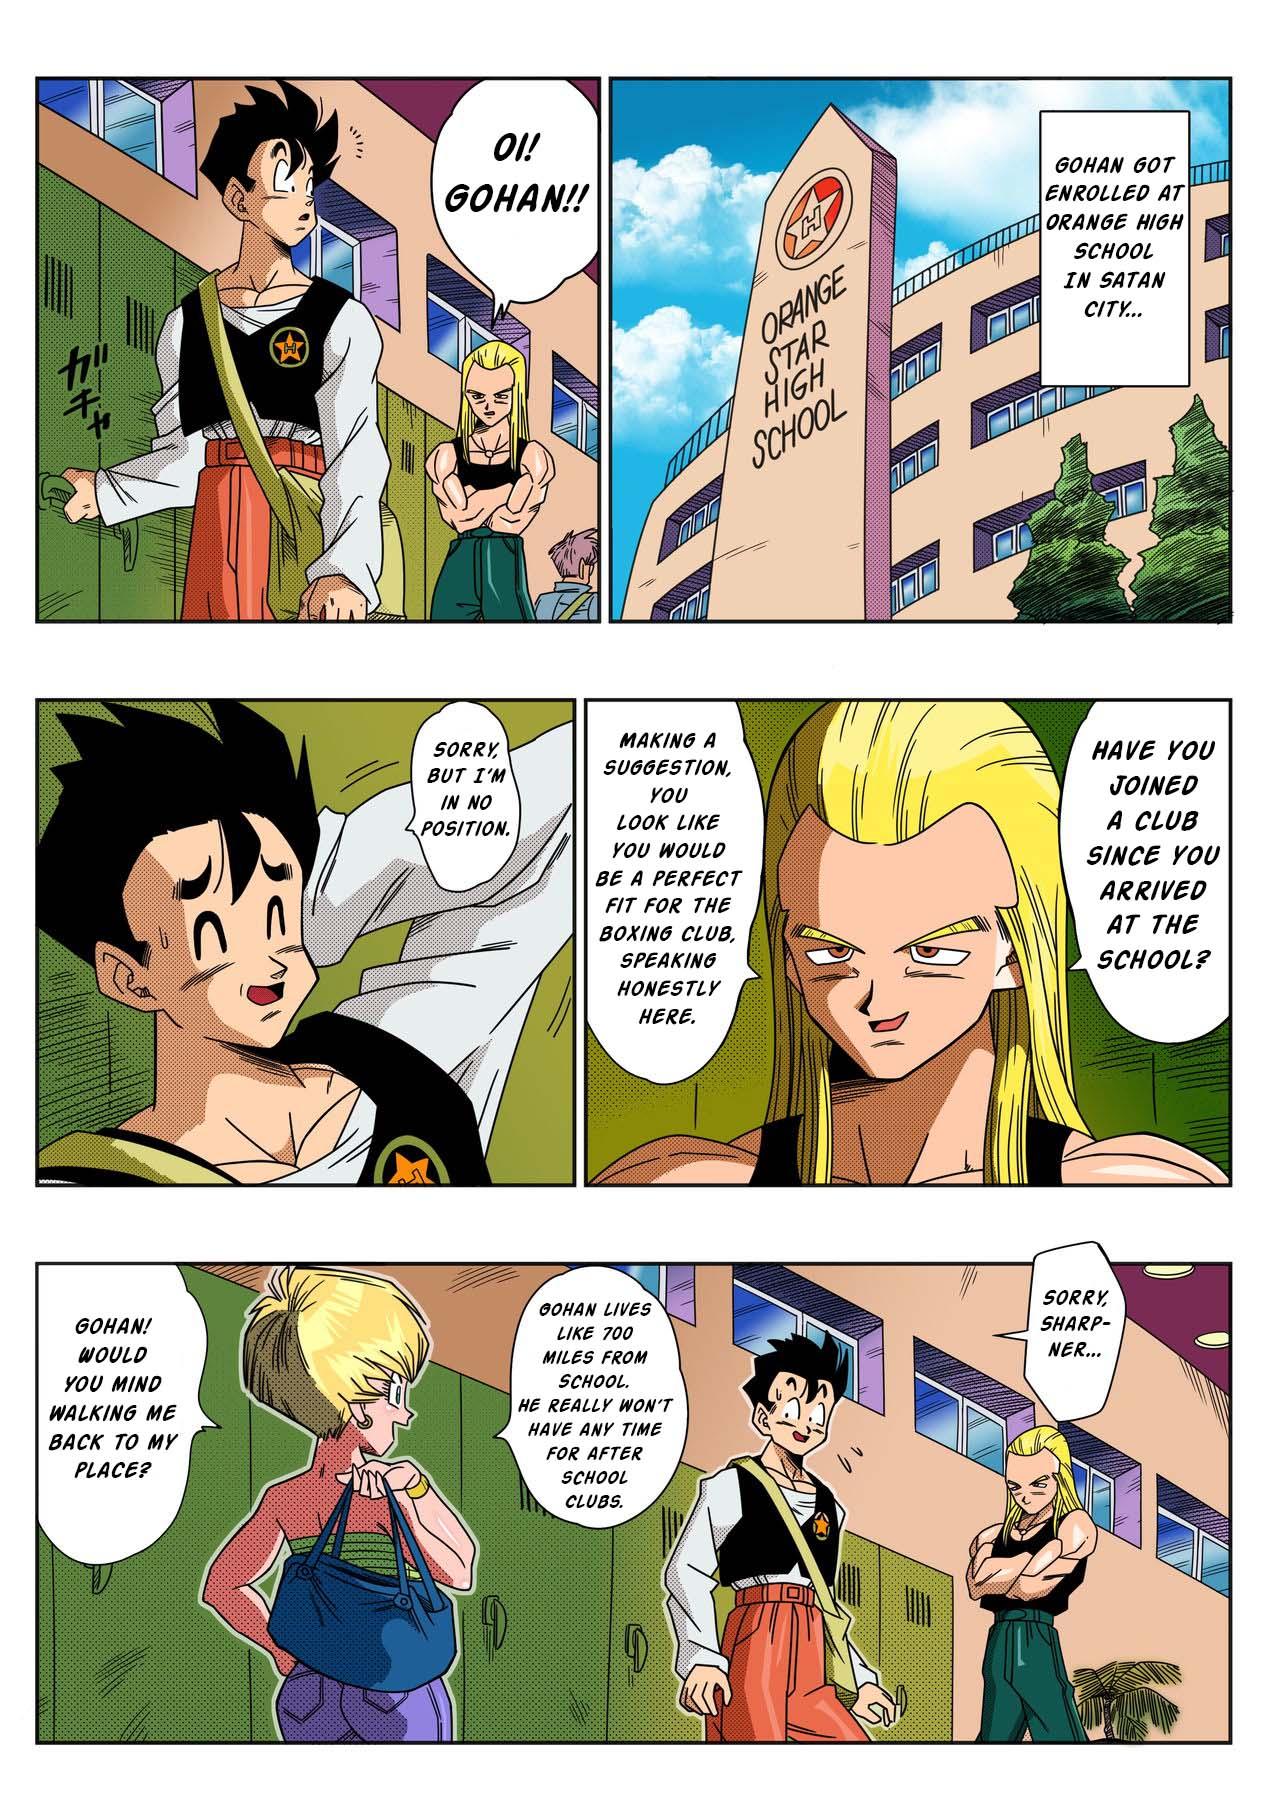 With LOVE TRIANGLE Z Part 1-4 - Dragon ball z Italian - Page 4